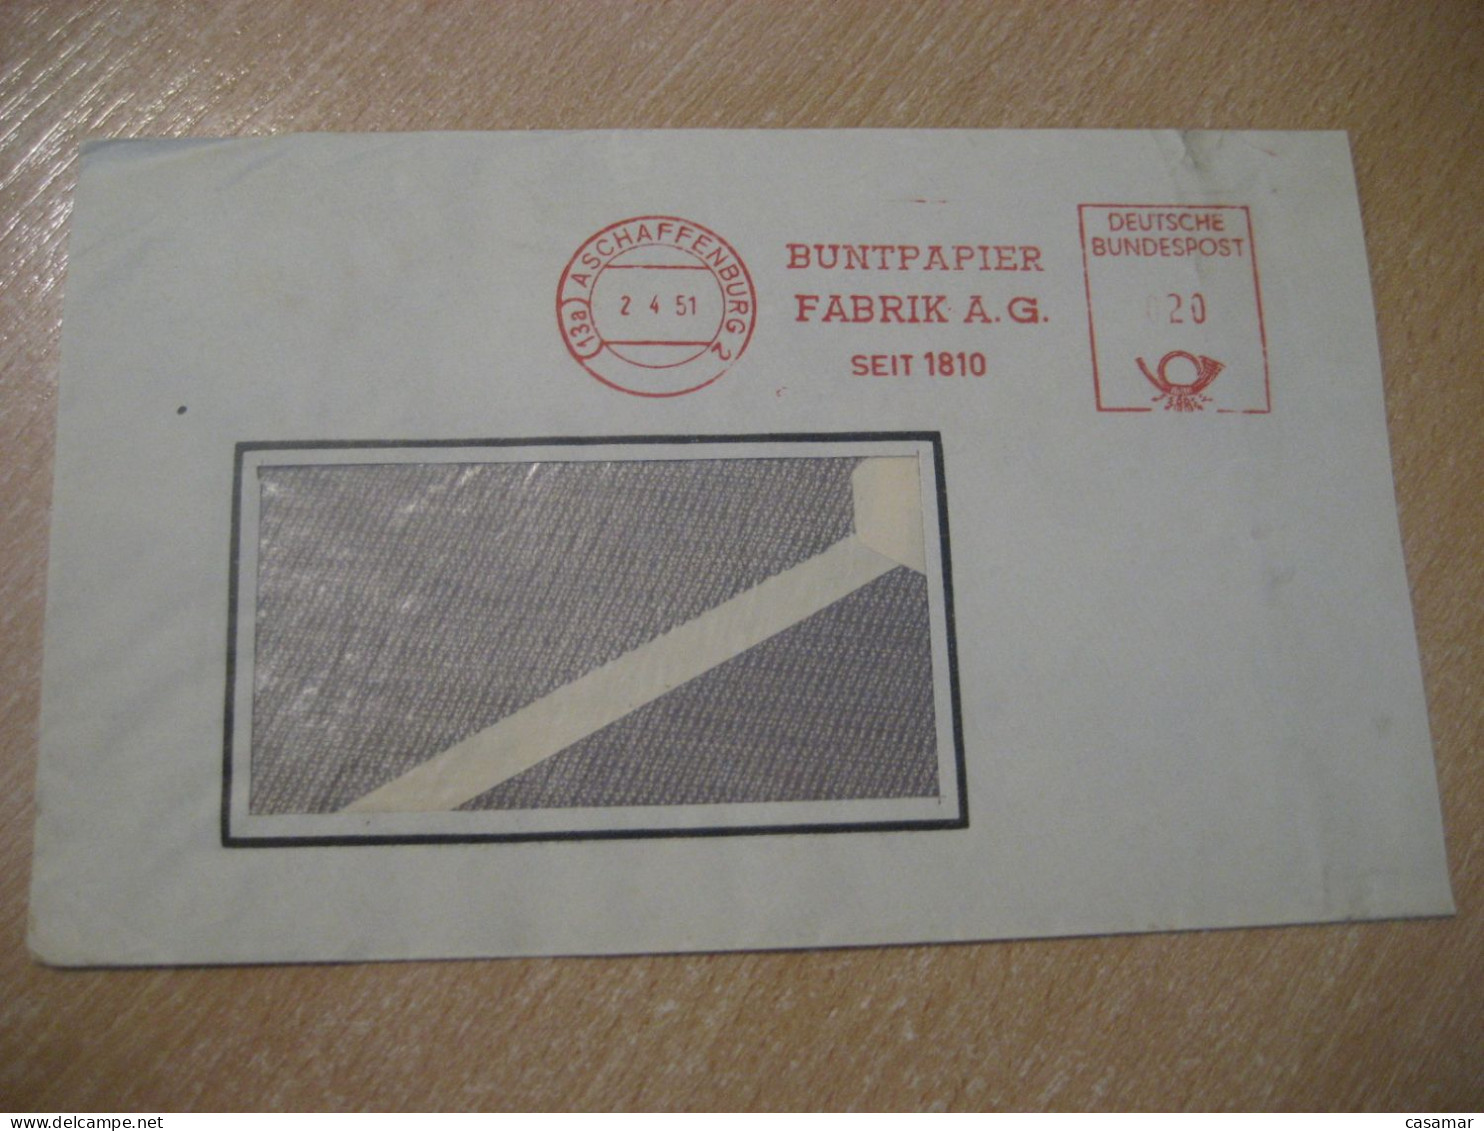 ASCHAFFENBURG 1951 Buntpapier Fabrik A.G. Meter Mail Cancel Cover GERMANY - Covers & Documents